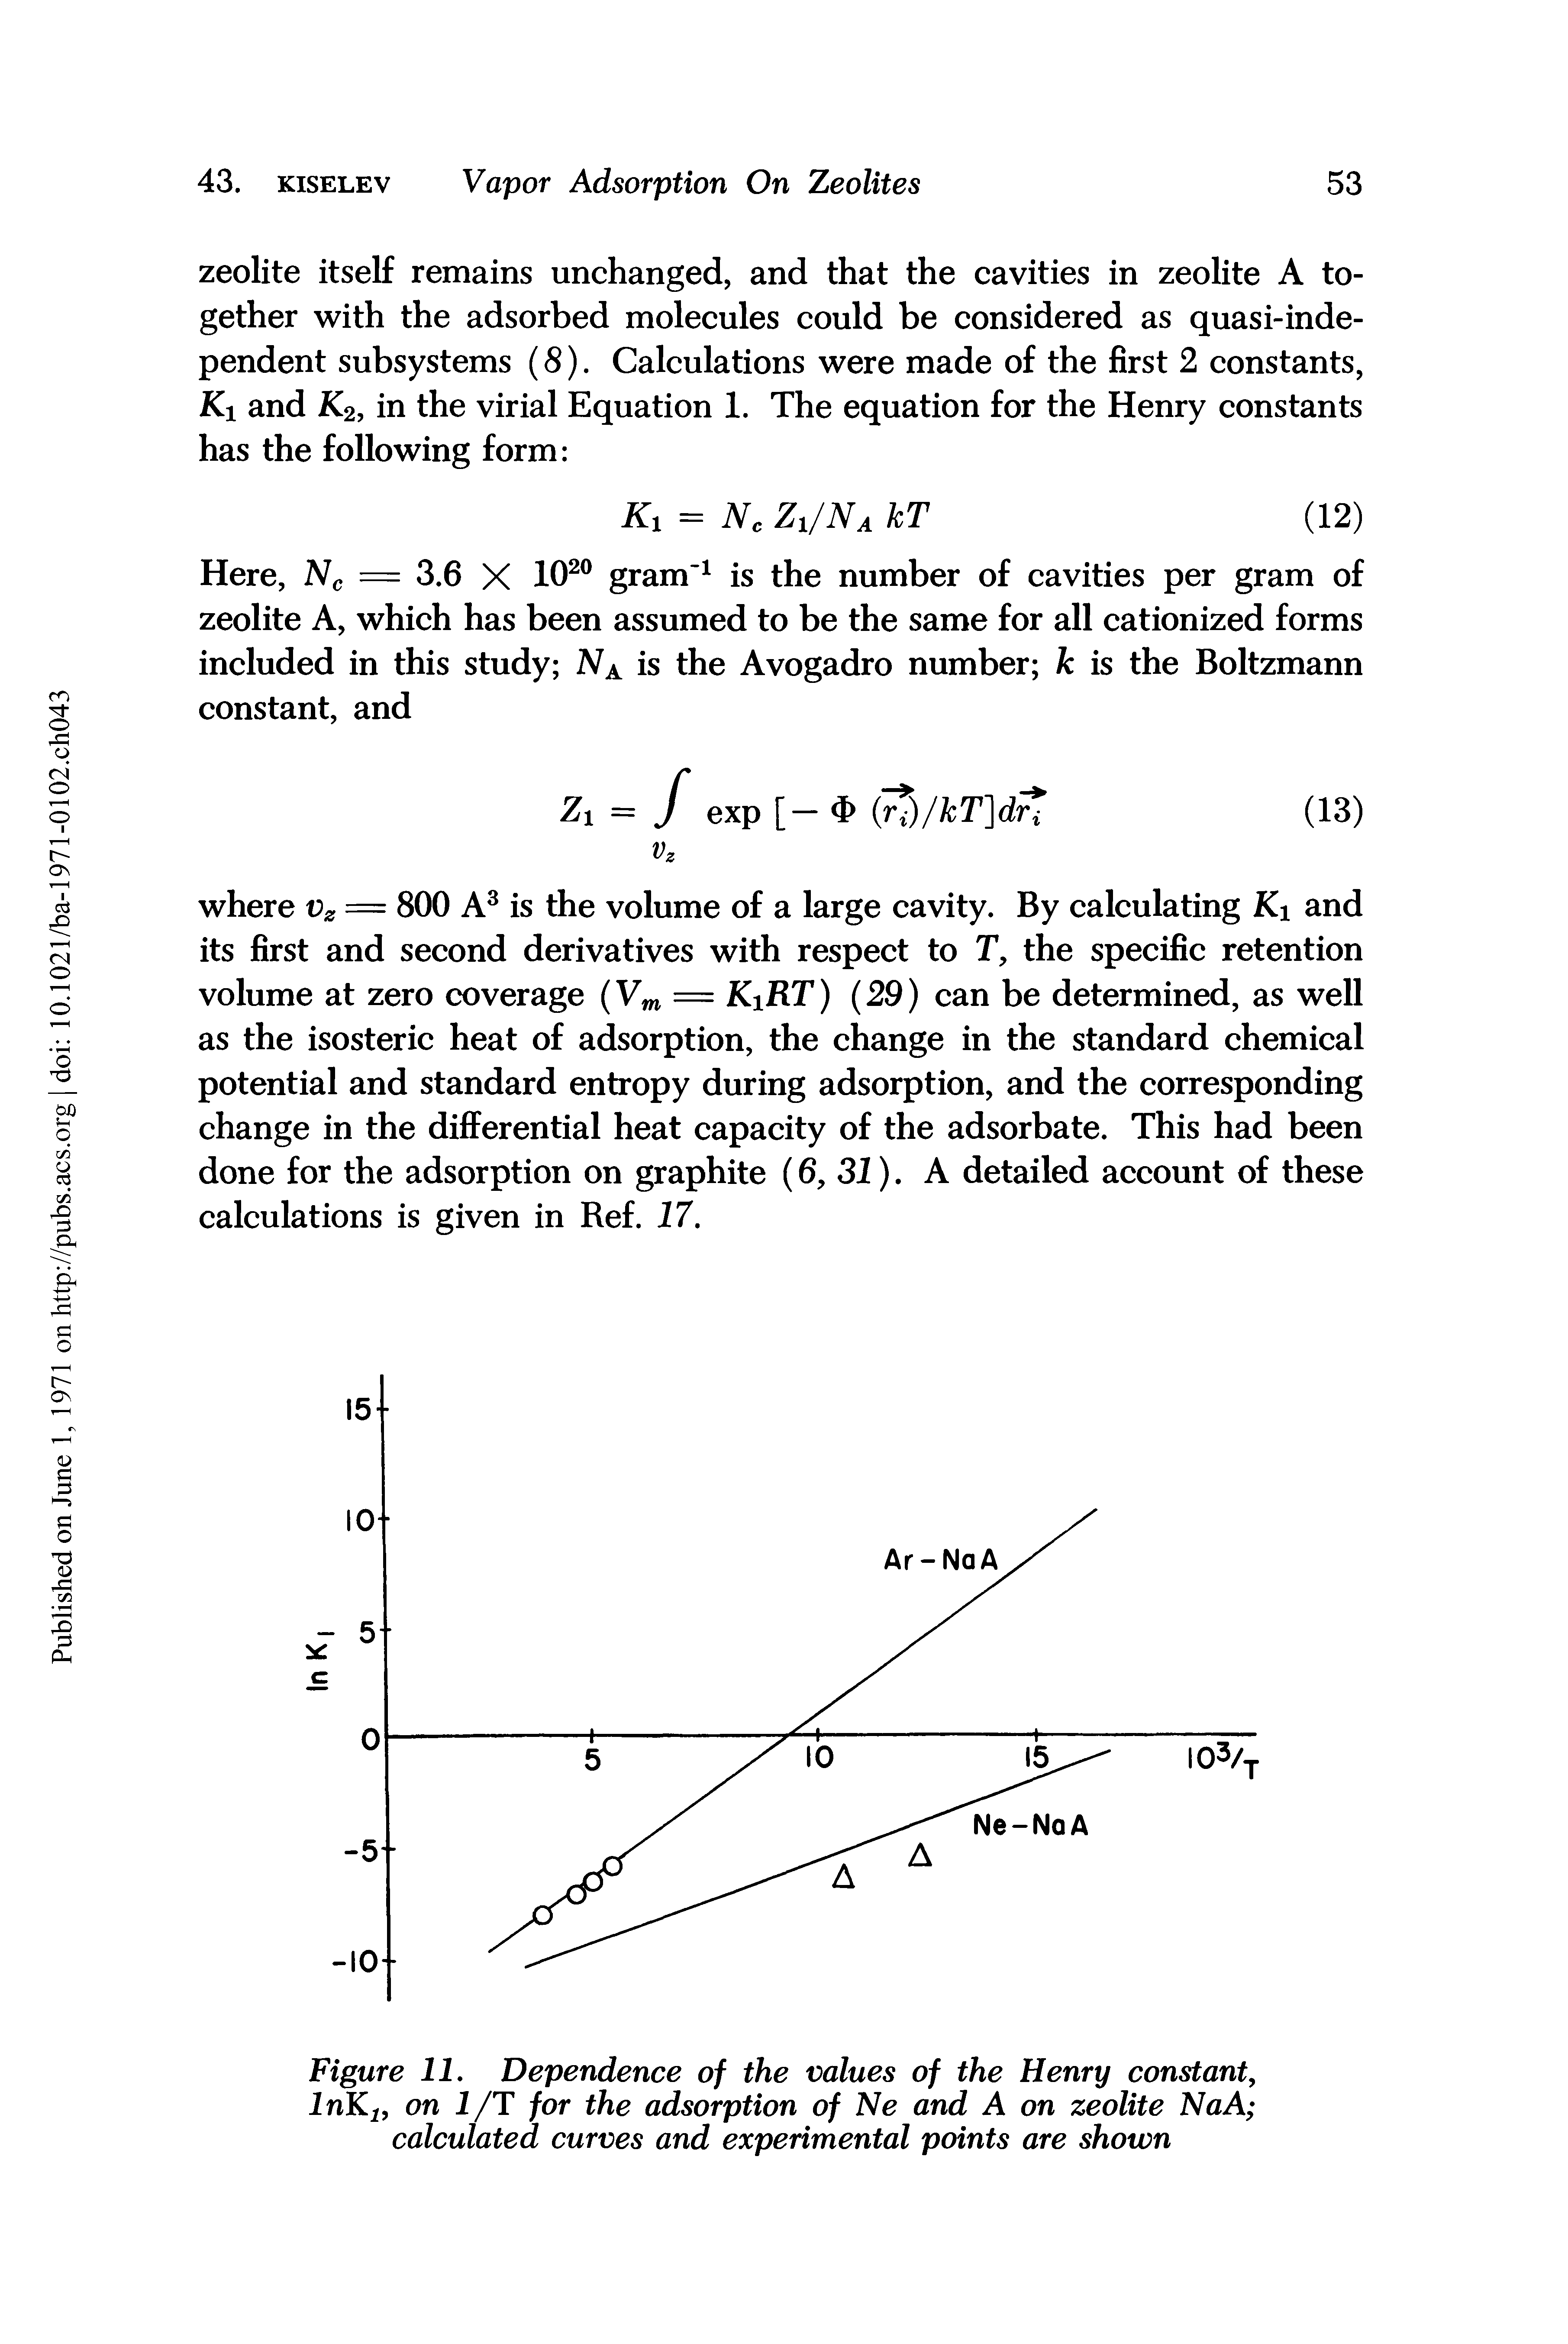 Figure 11. Dependence of the values of the Henry constant, InKi, on 1/T for the adsorption of Ne and A on zeolite NaA calculated curves and experimental points are shown...